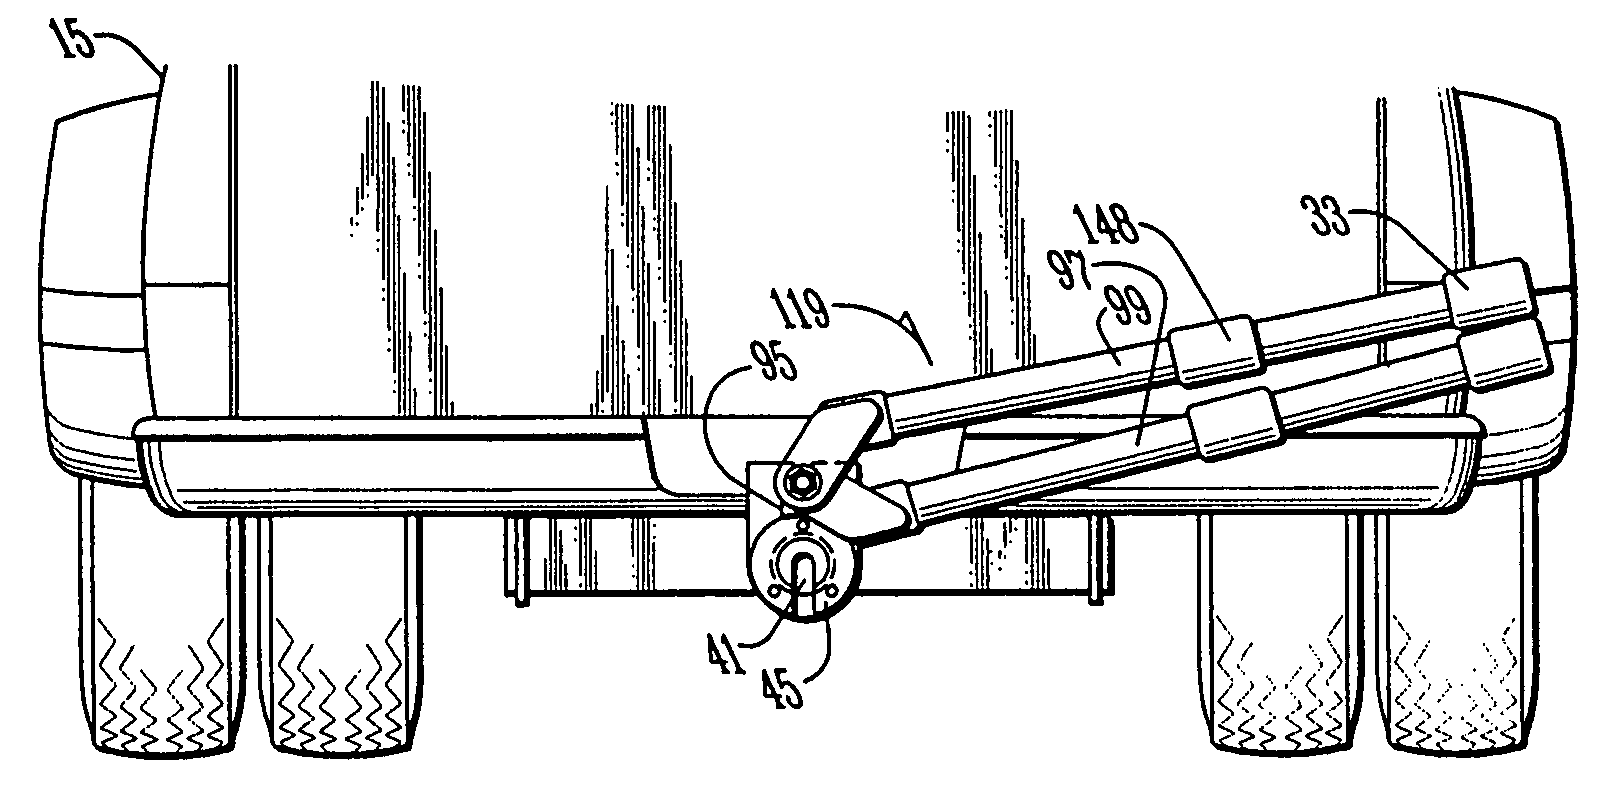 Tow bar having a single moving part for operatively accommodating pitch and roll movements between a towing vehicle and a towed vehicle